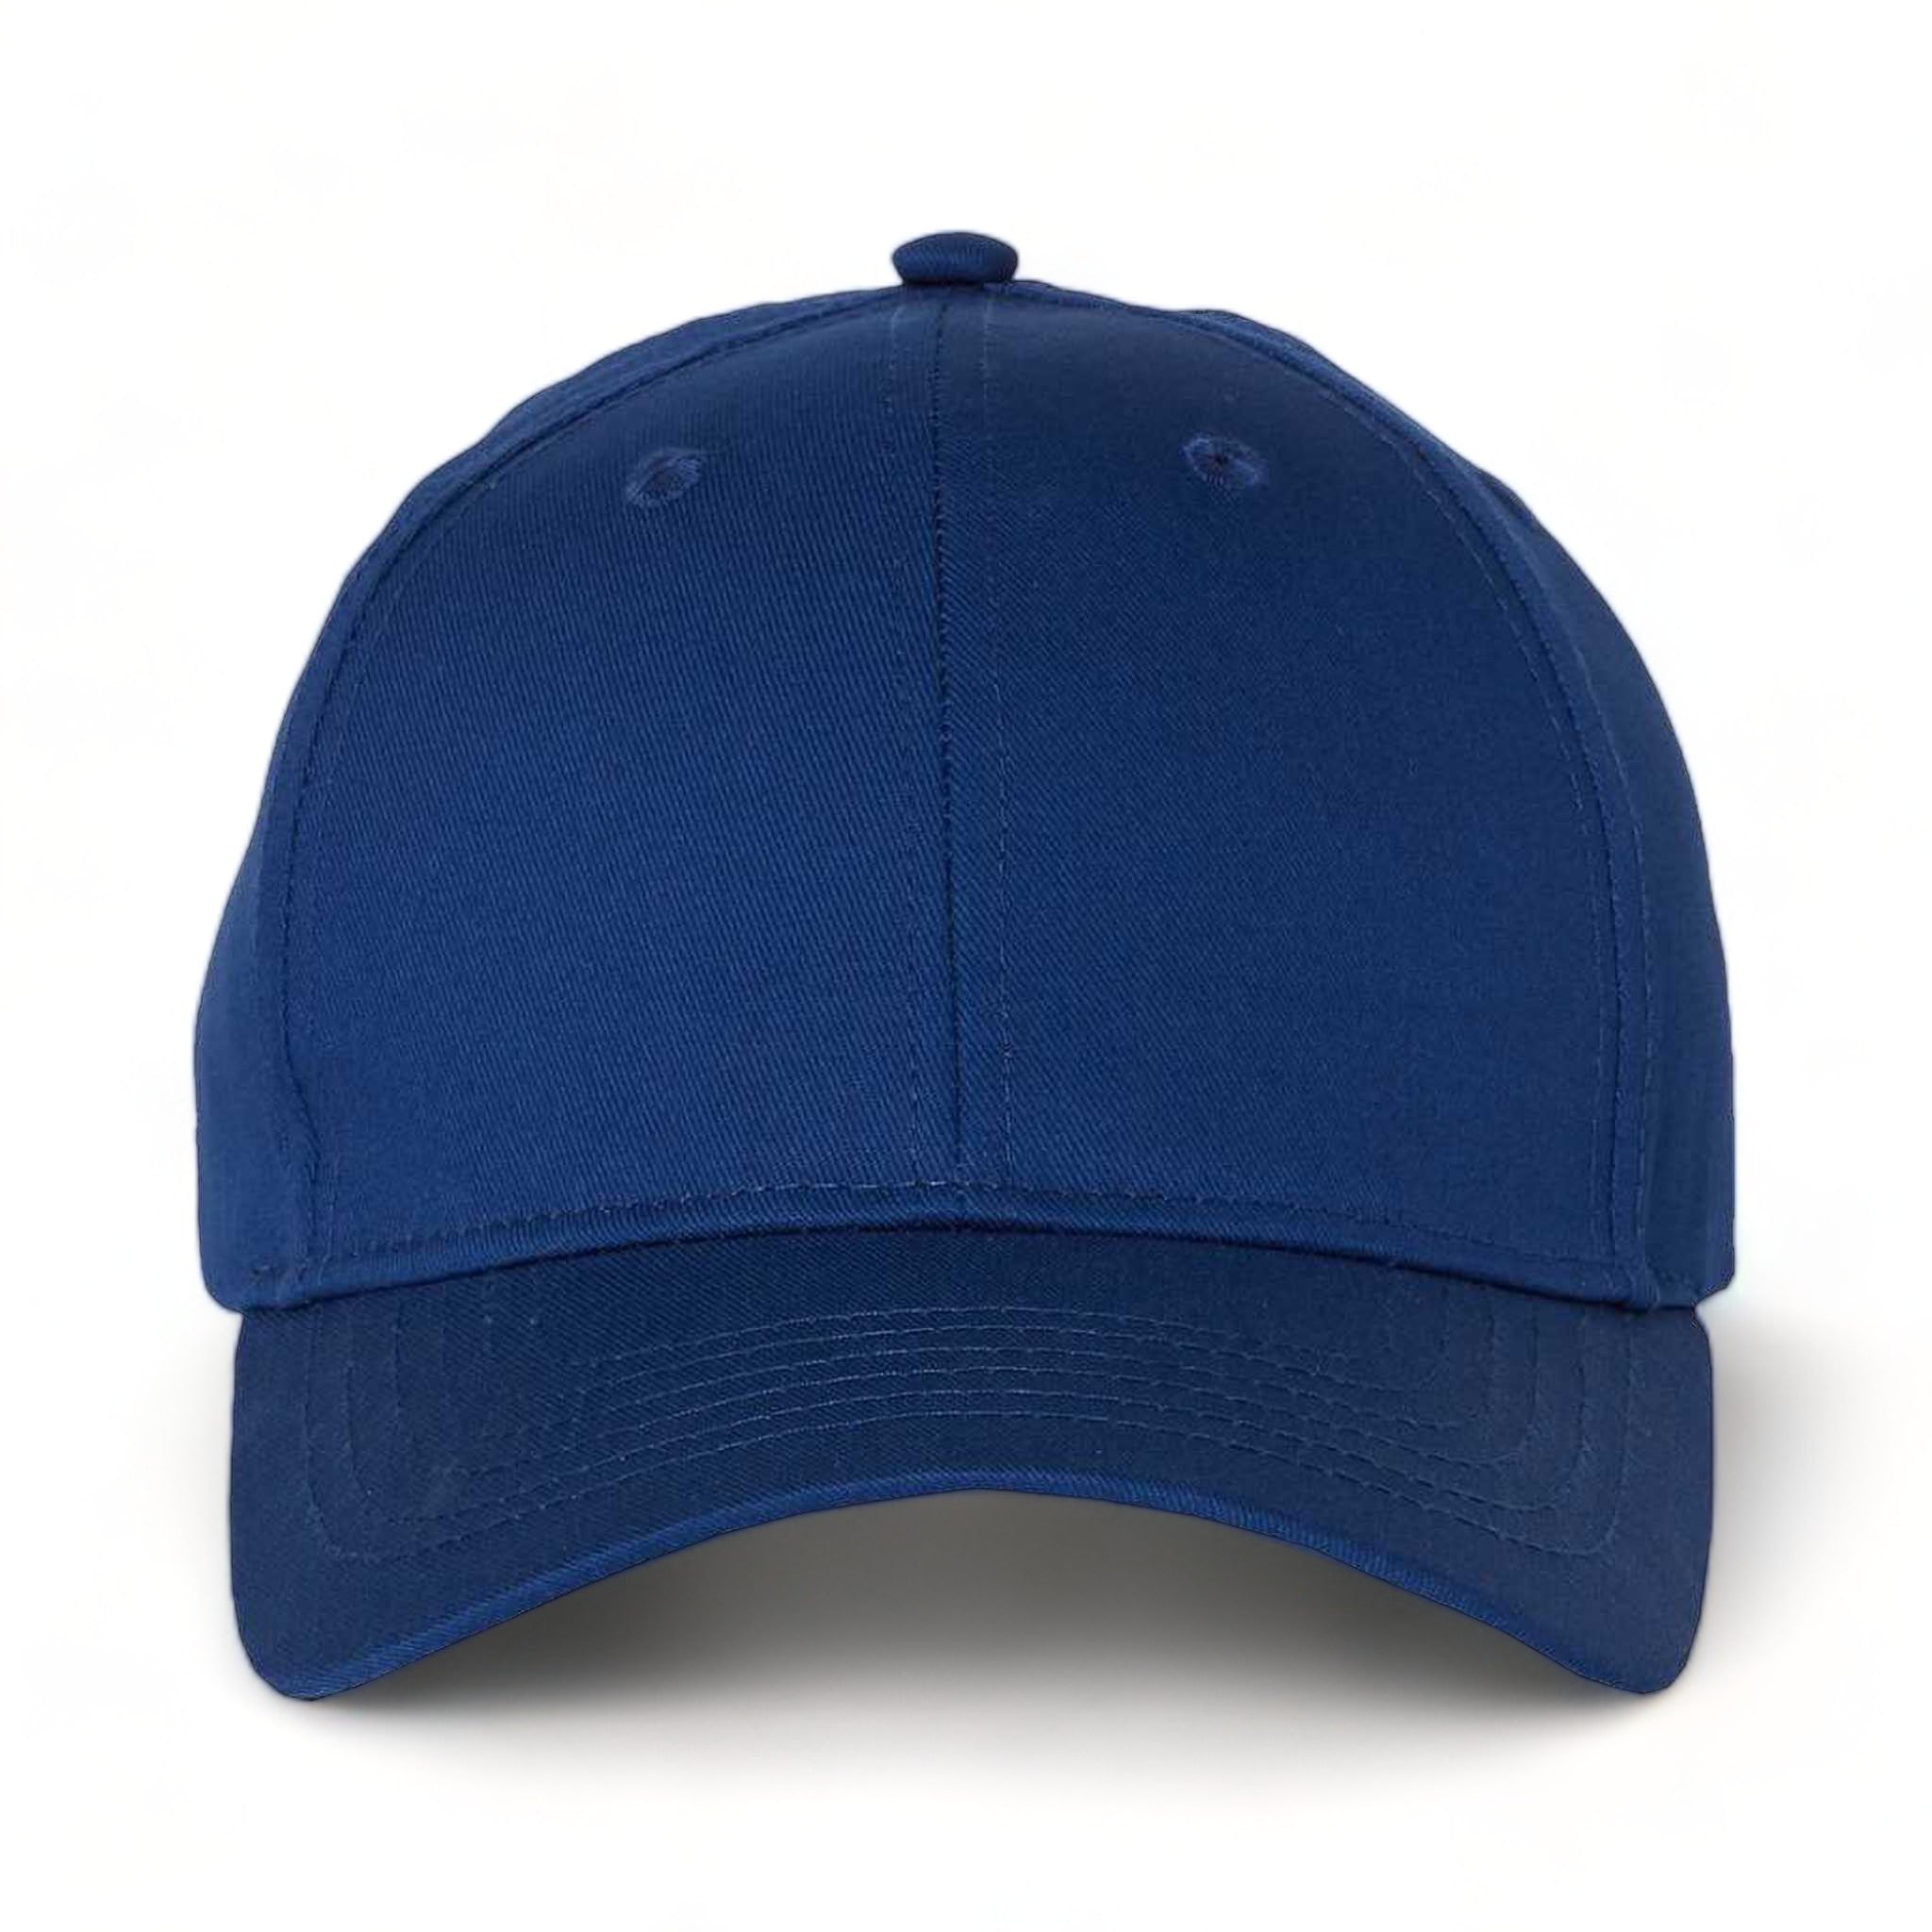 Front view of Sportsman 2260 custom hat in royal blue